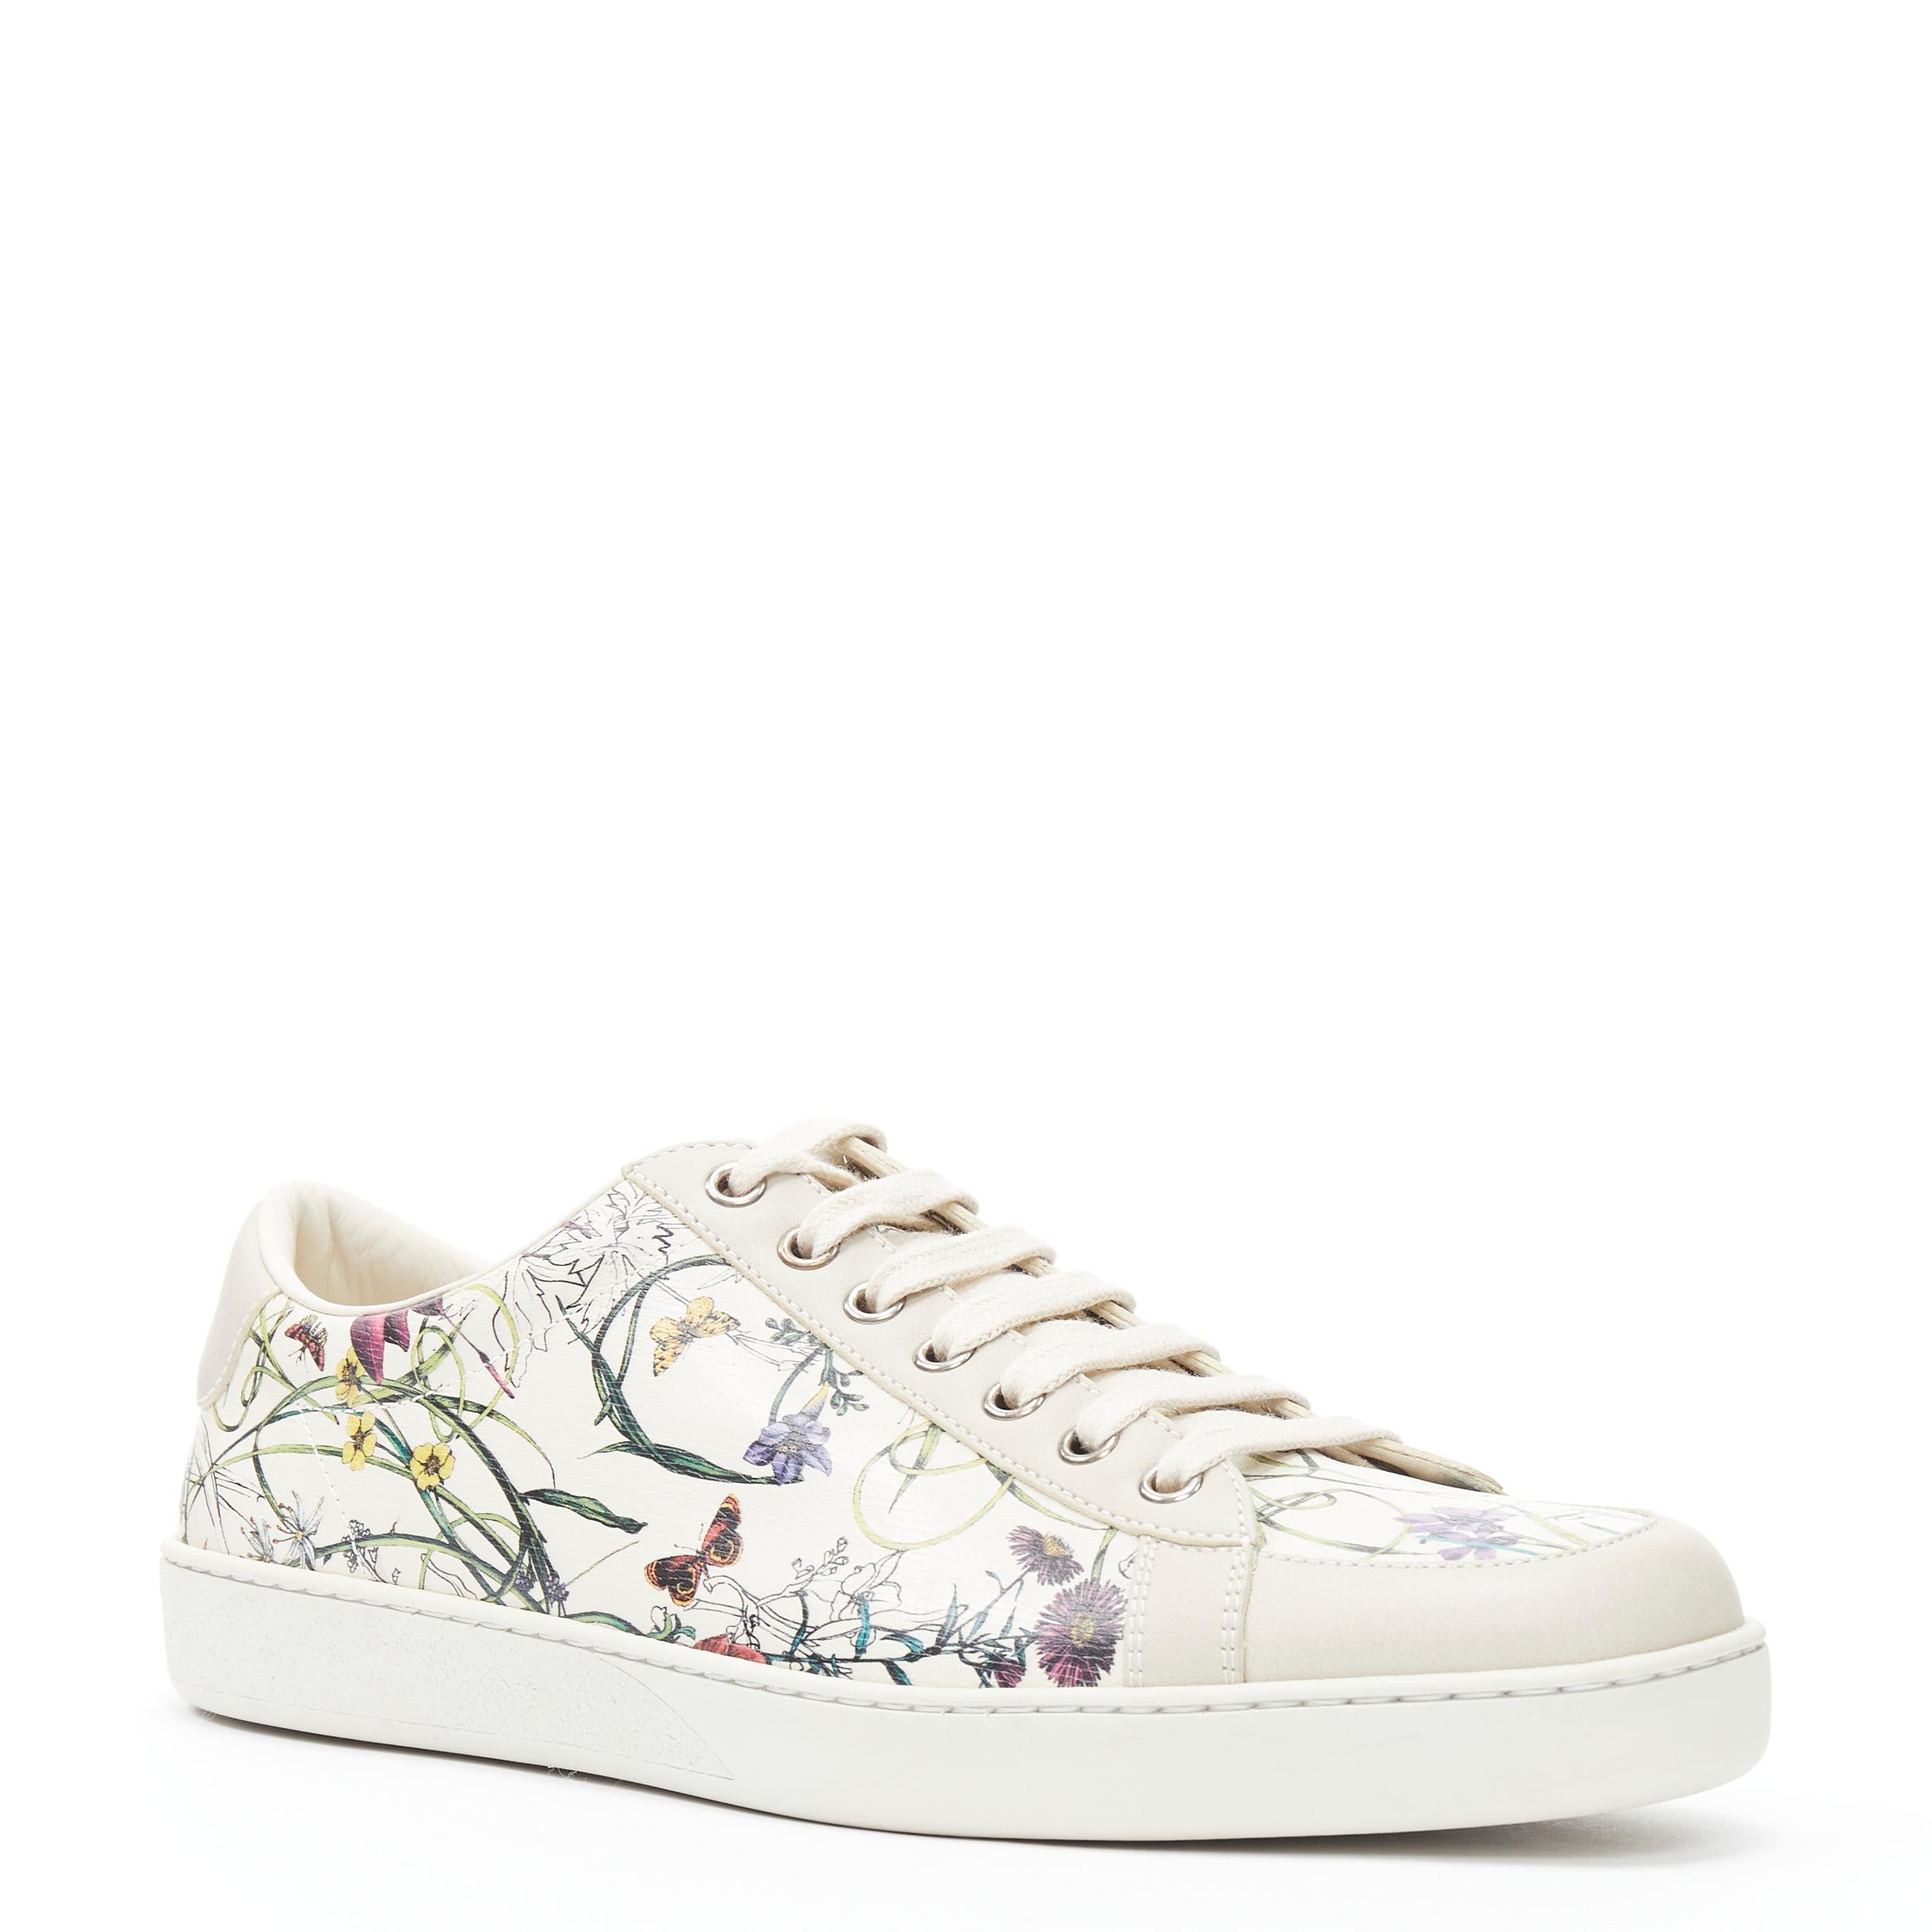 new GUCCI Flora floral print grey beige leather low top sneaker UK7.5 EU41.5 
Reference: TGAS/B01264 
Brand: Gucci 
Model: Flora low top 
Material: Leather 
Color: White 
Pattern: Floral 
Closure: Lace Up 
Extra Detail: Grey leather with signature